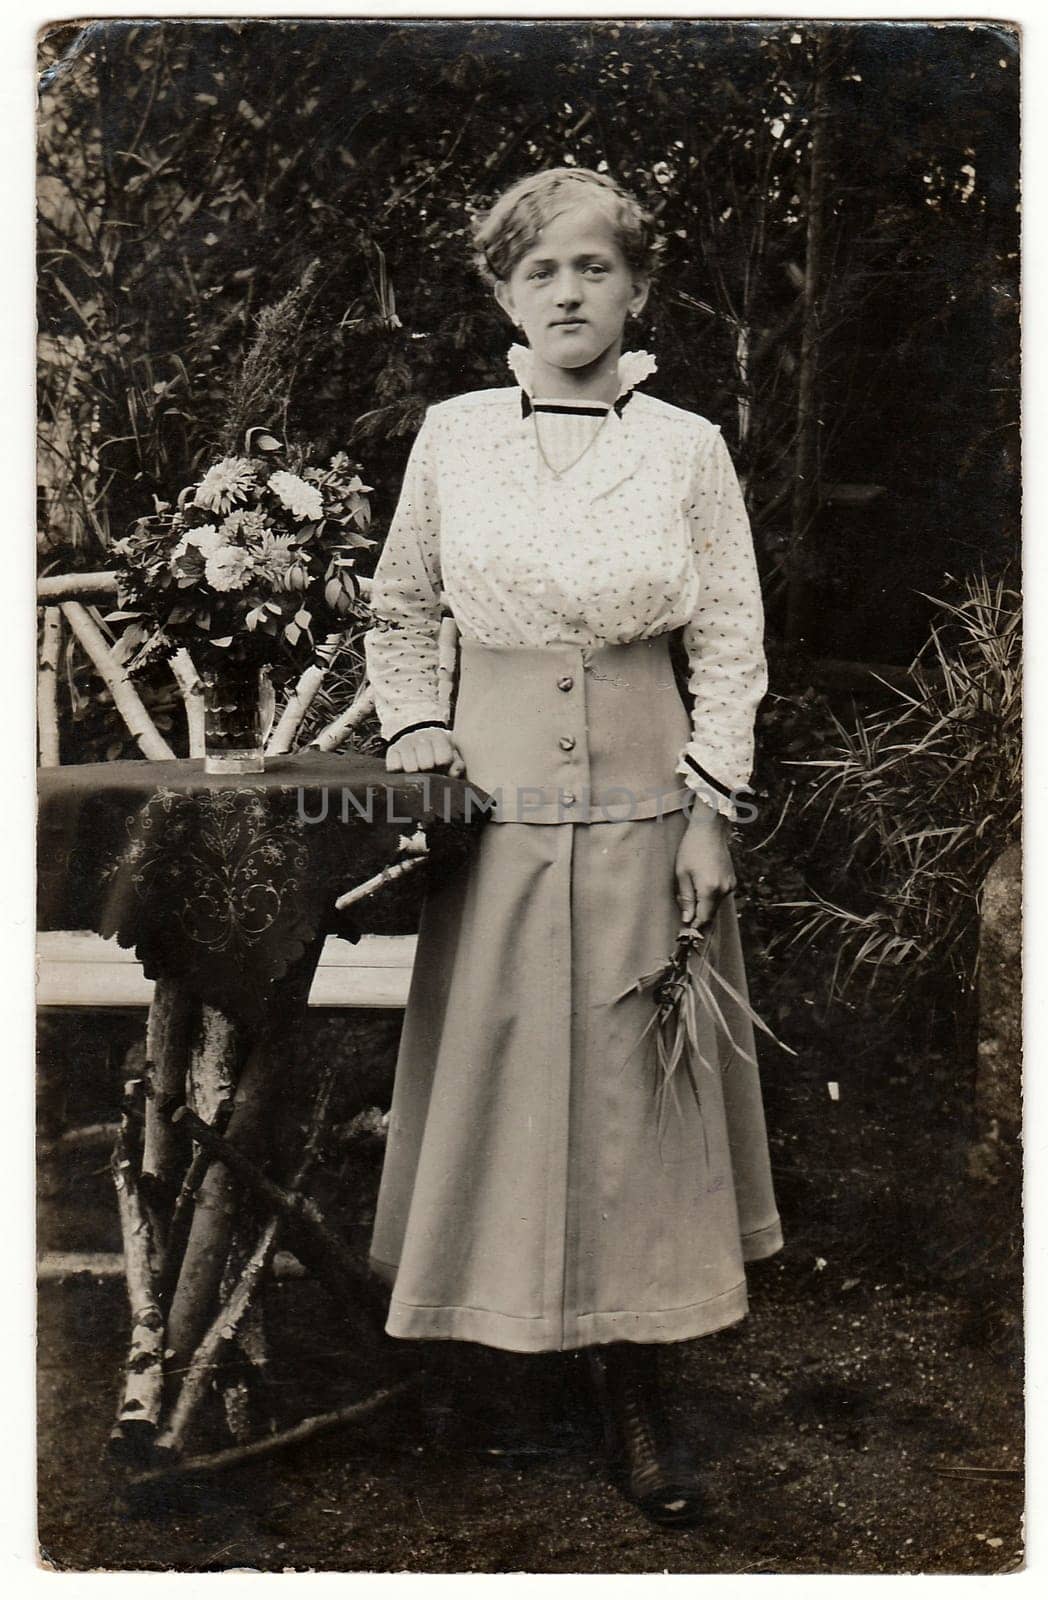 Vintage photo shows an elegant woman poses next to a rustic garden table. Black white antique photo. by roman_nerud